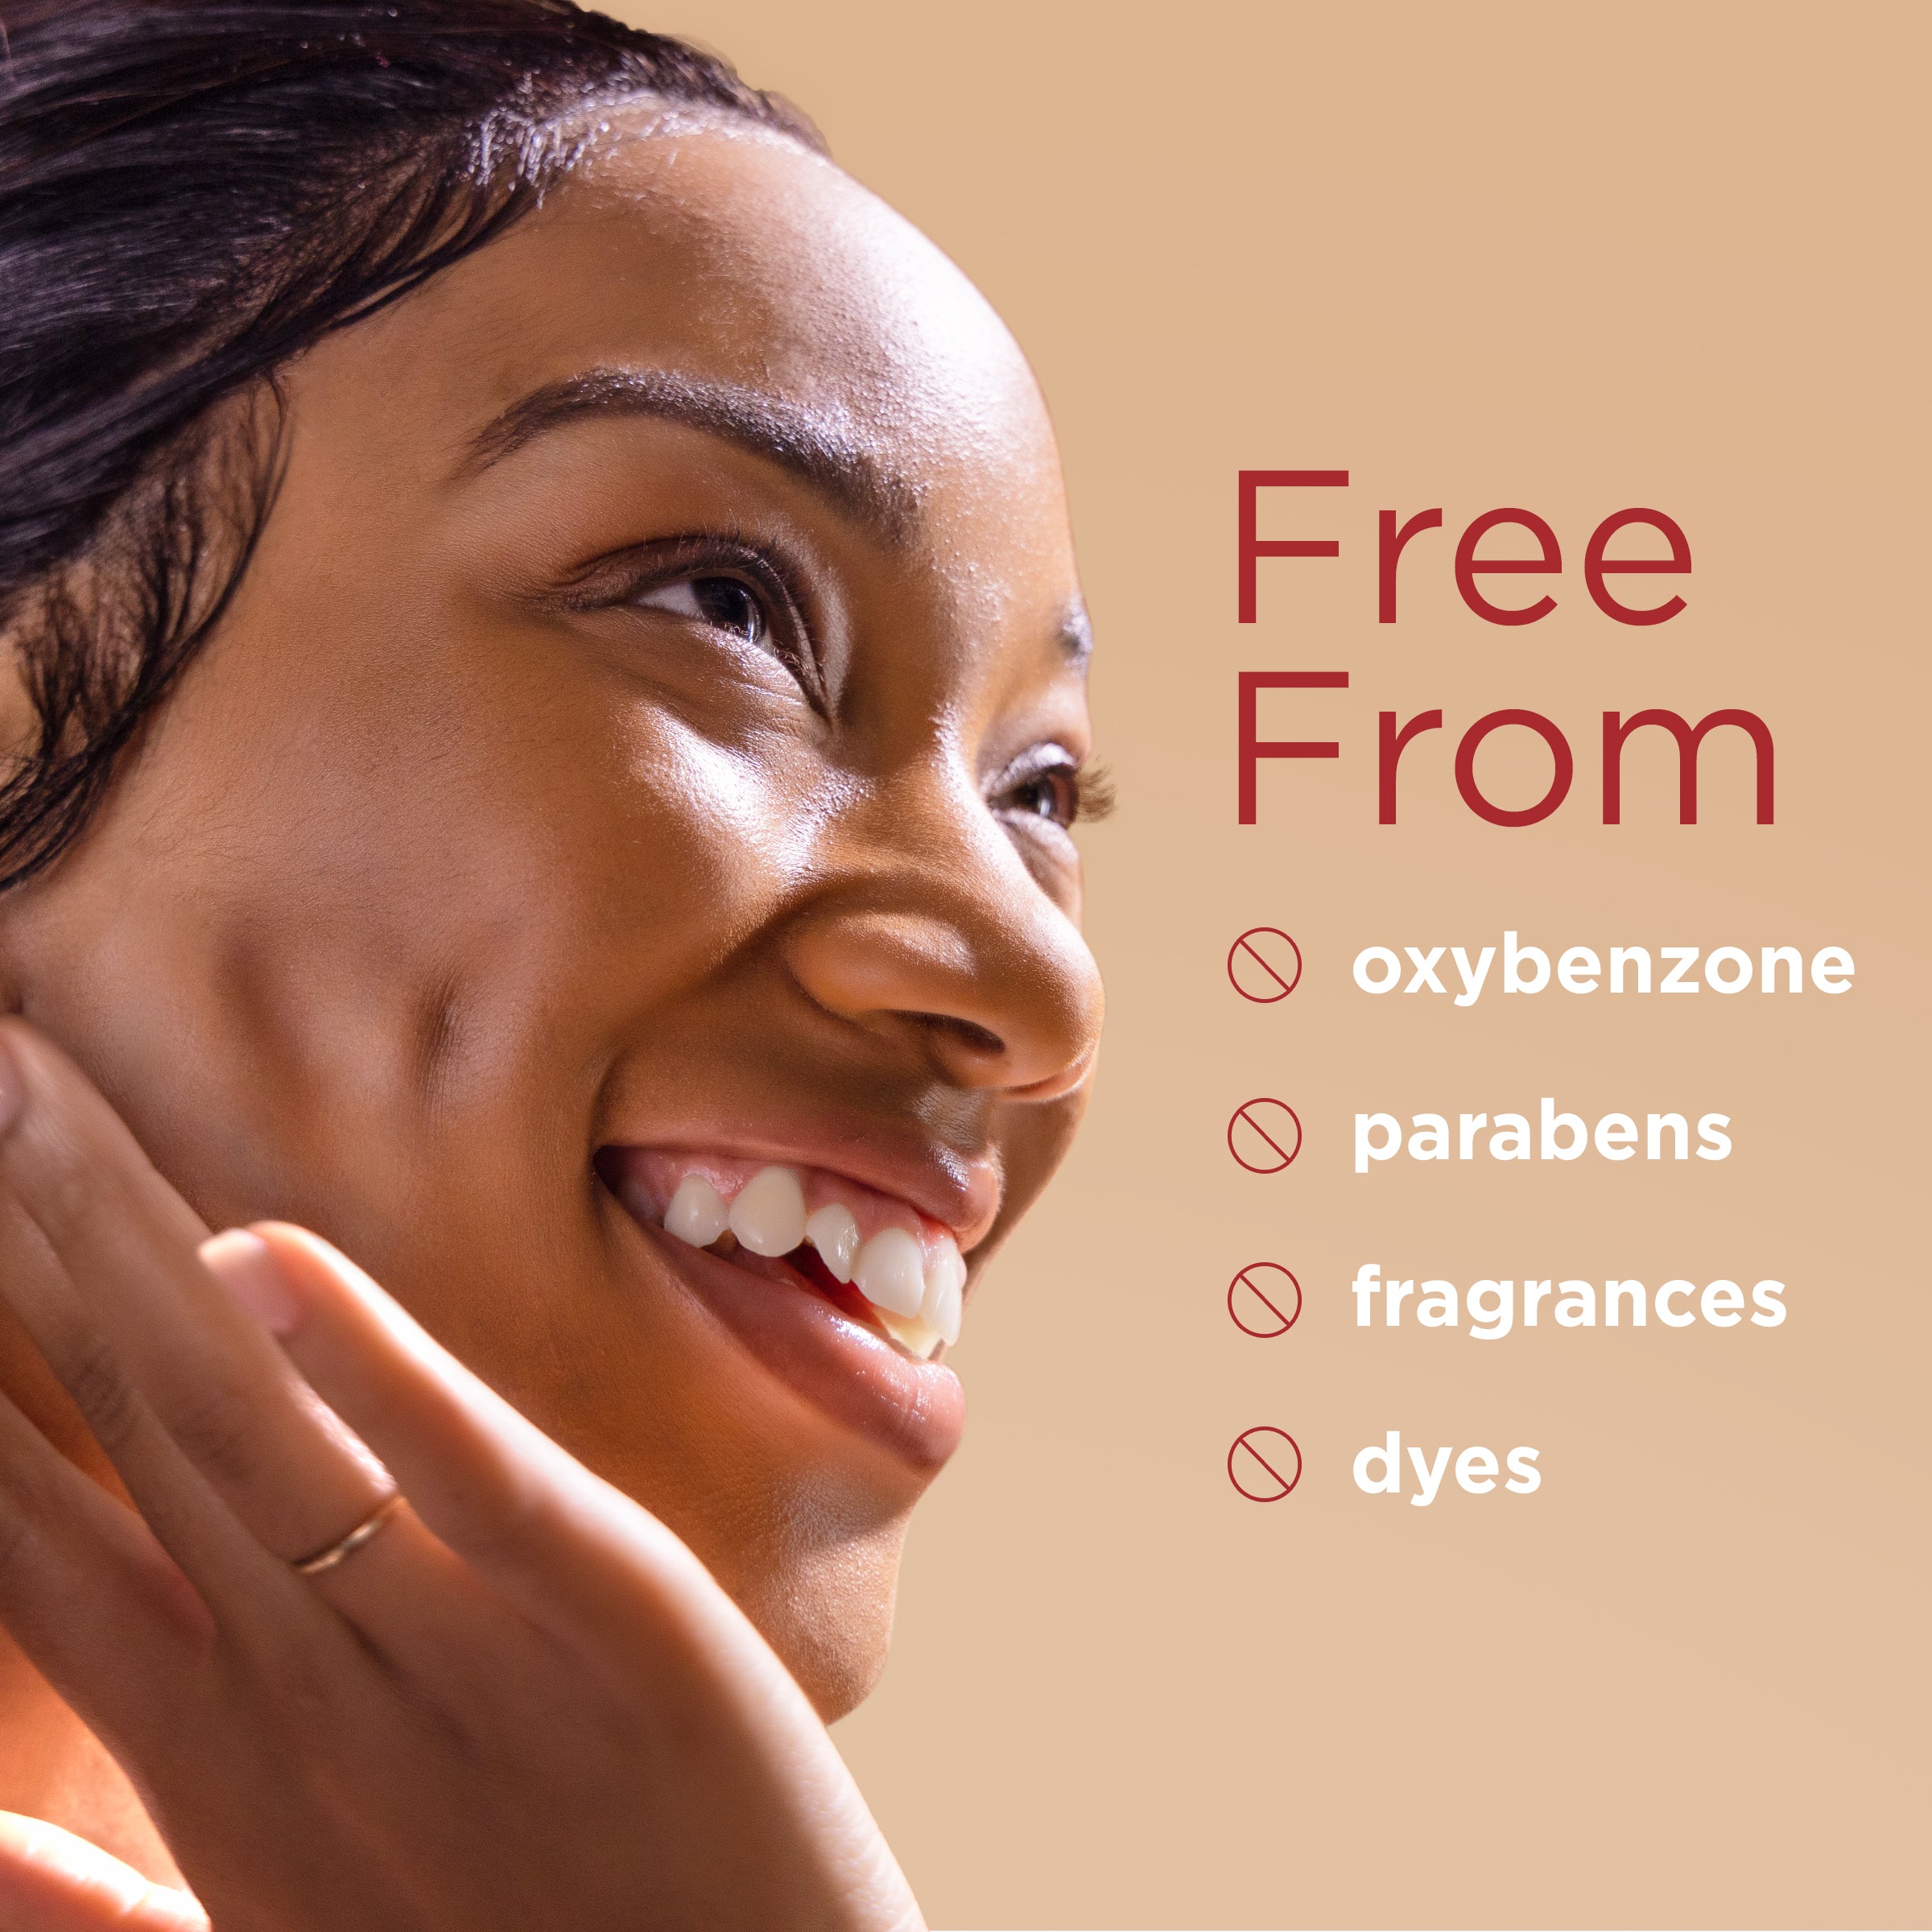 Free from oxybenzone, parabens, fragrances, dyes